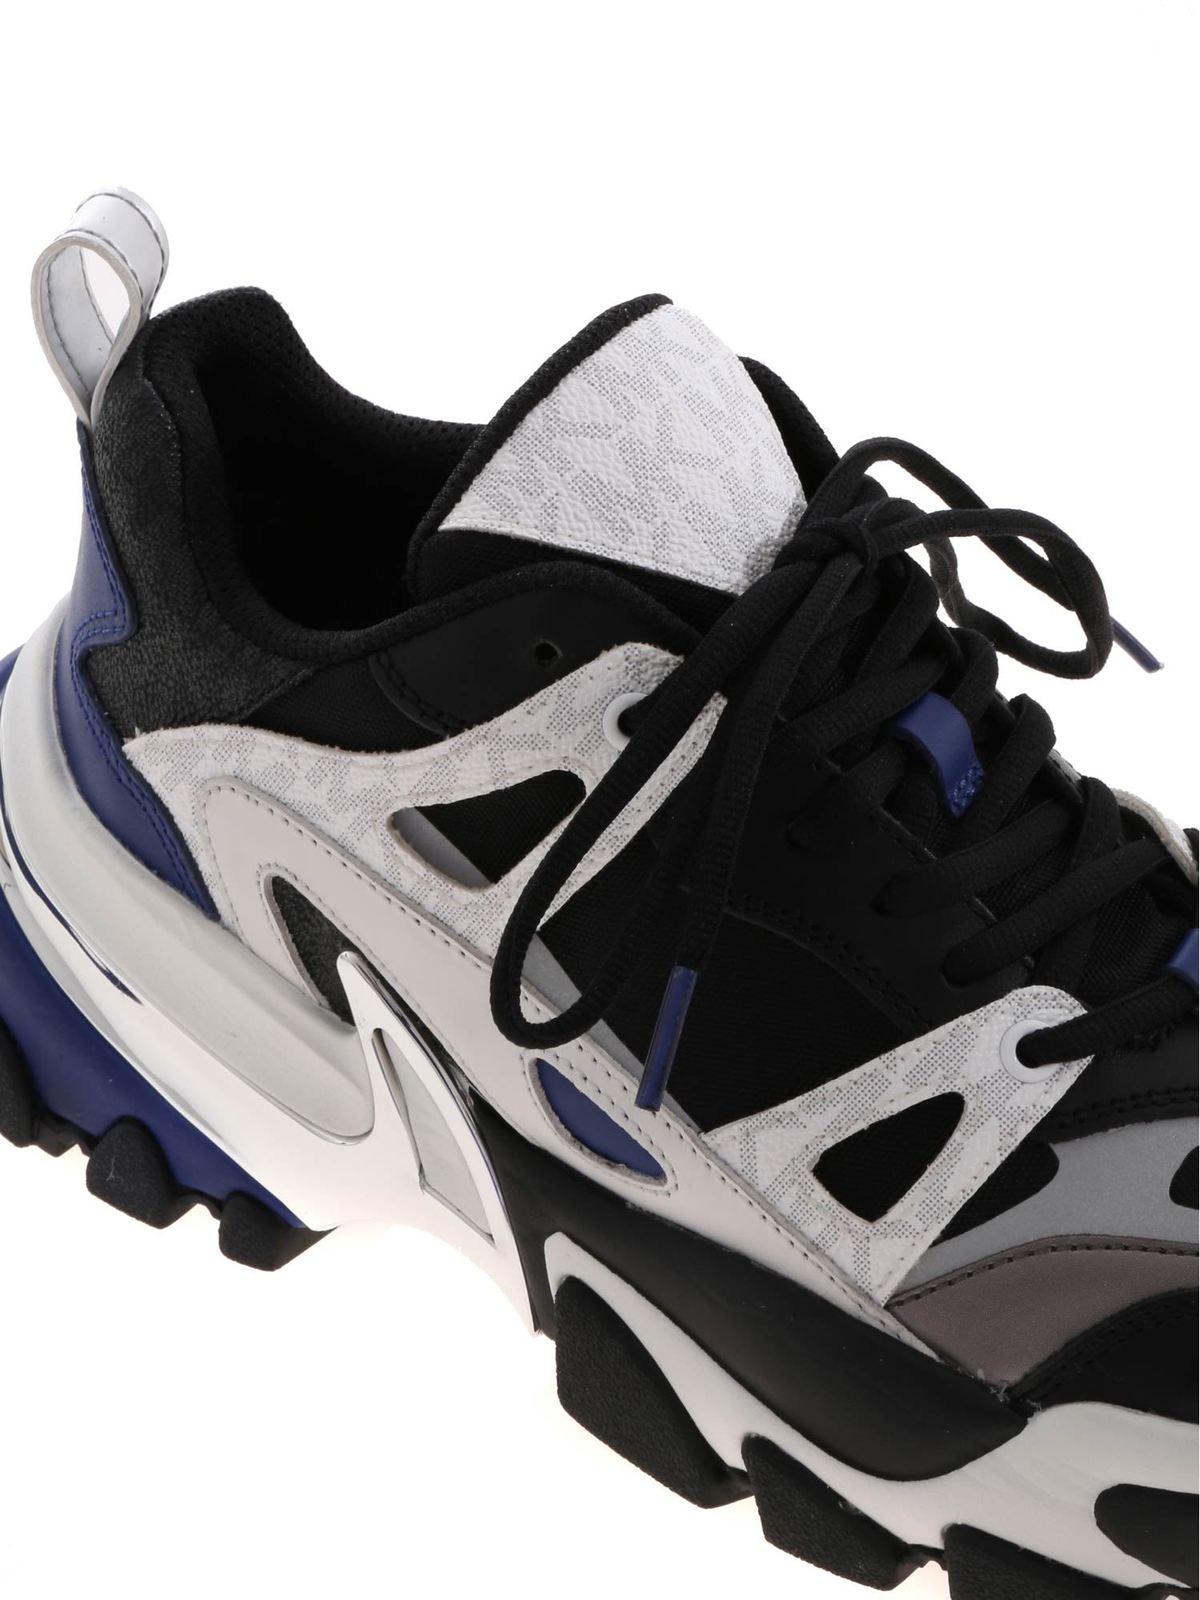 Trainers Kors - Sneakers Penn black blue and white -